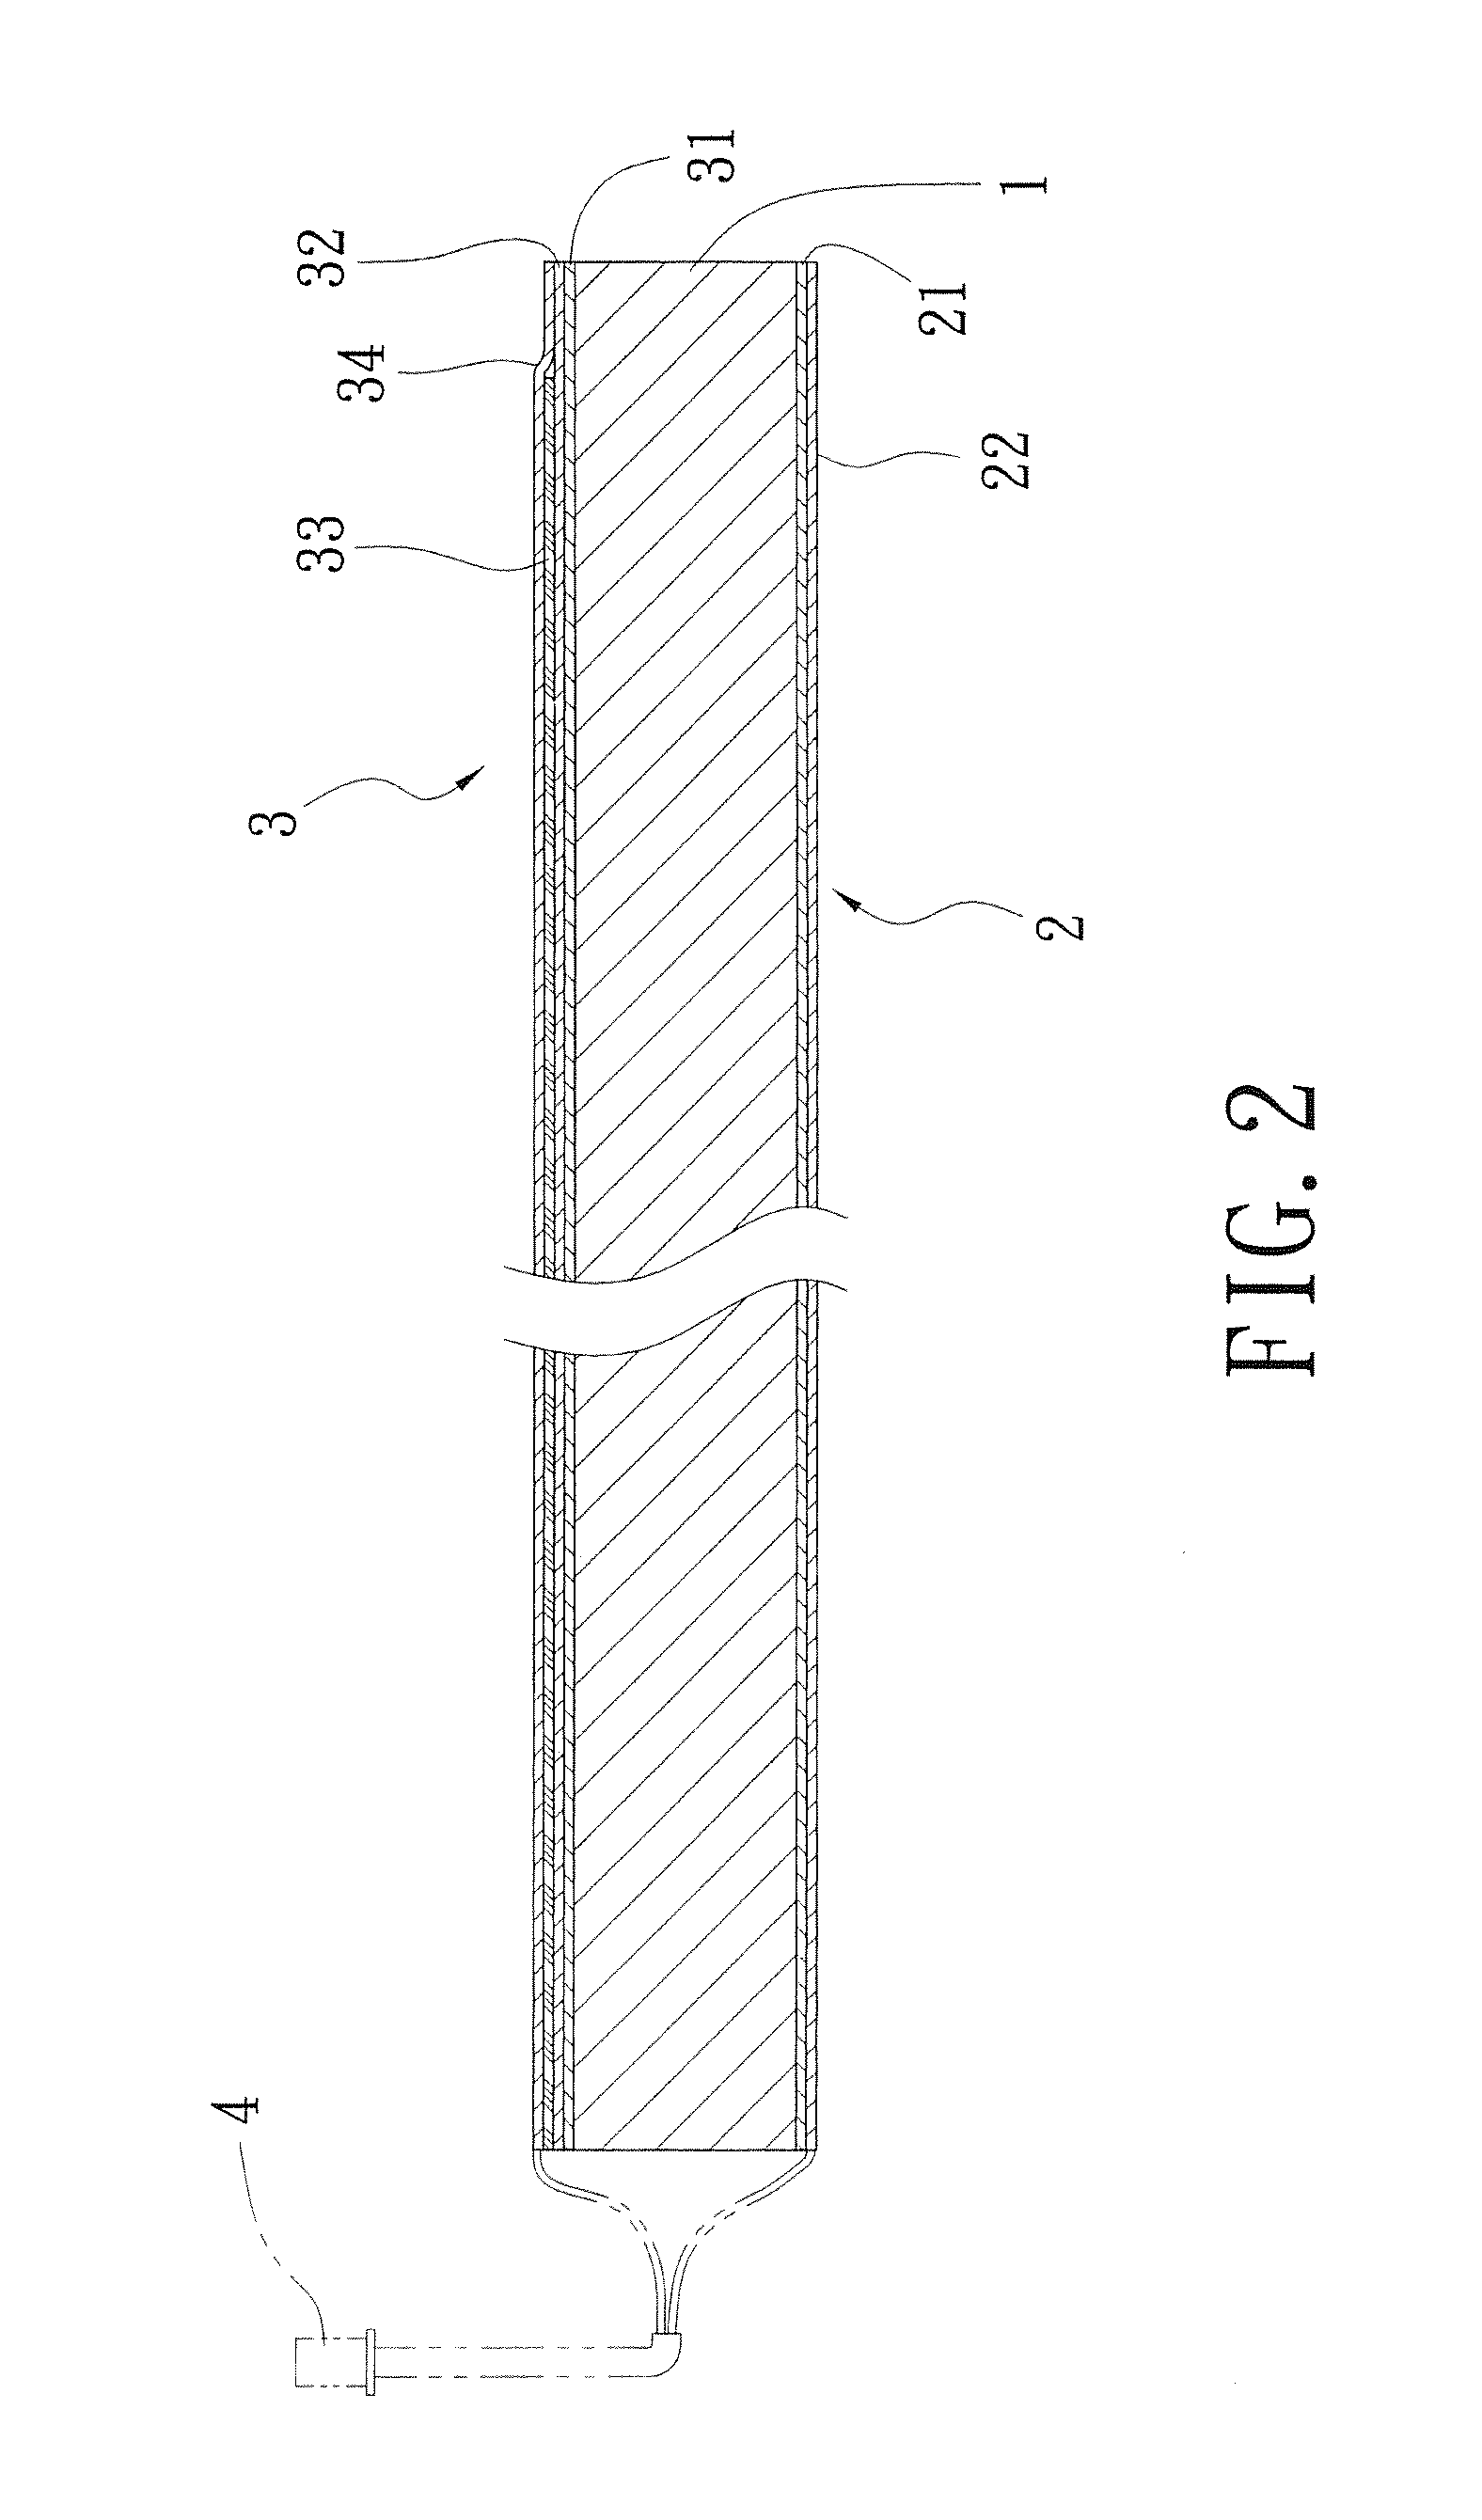 Conductive assembly for changing color of lens